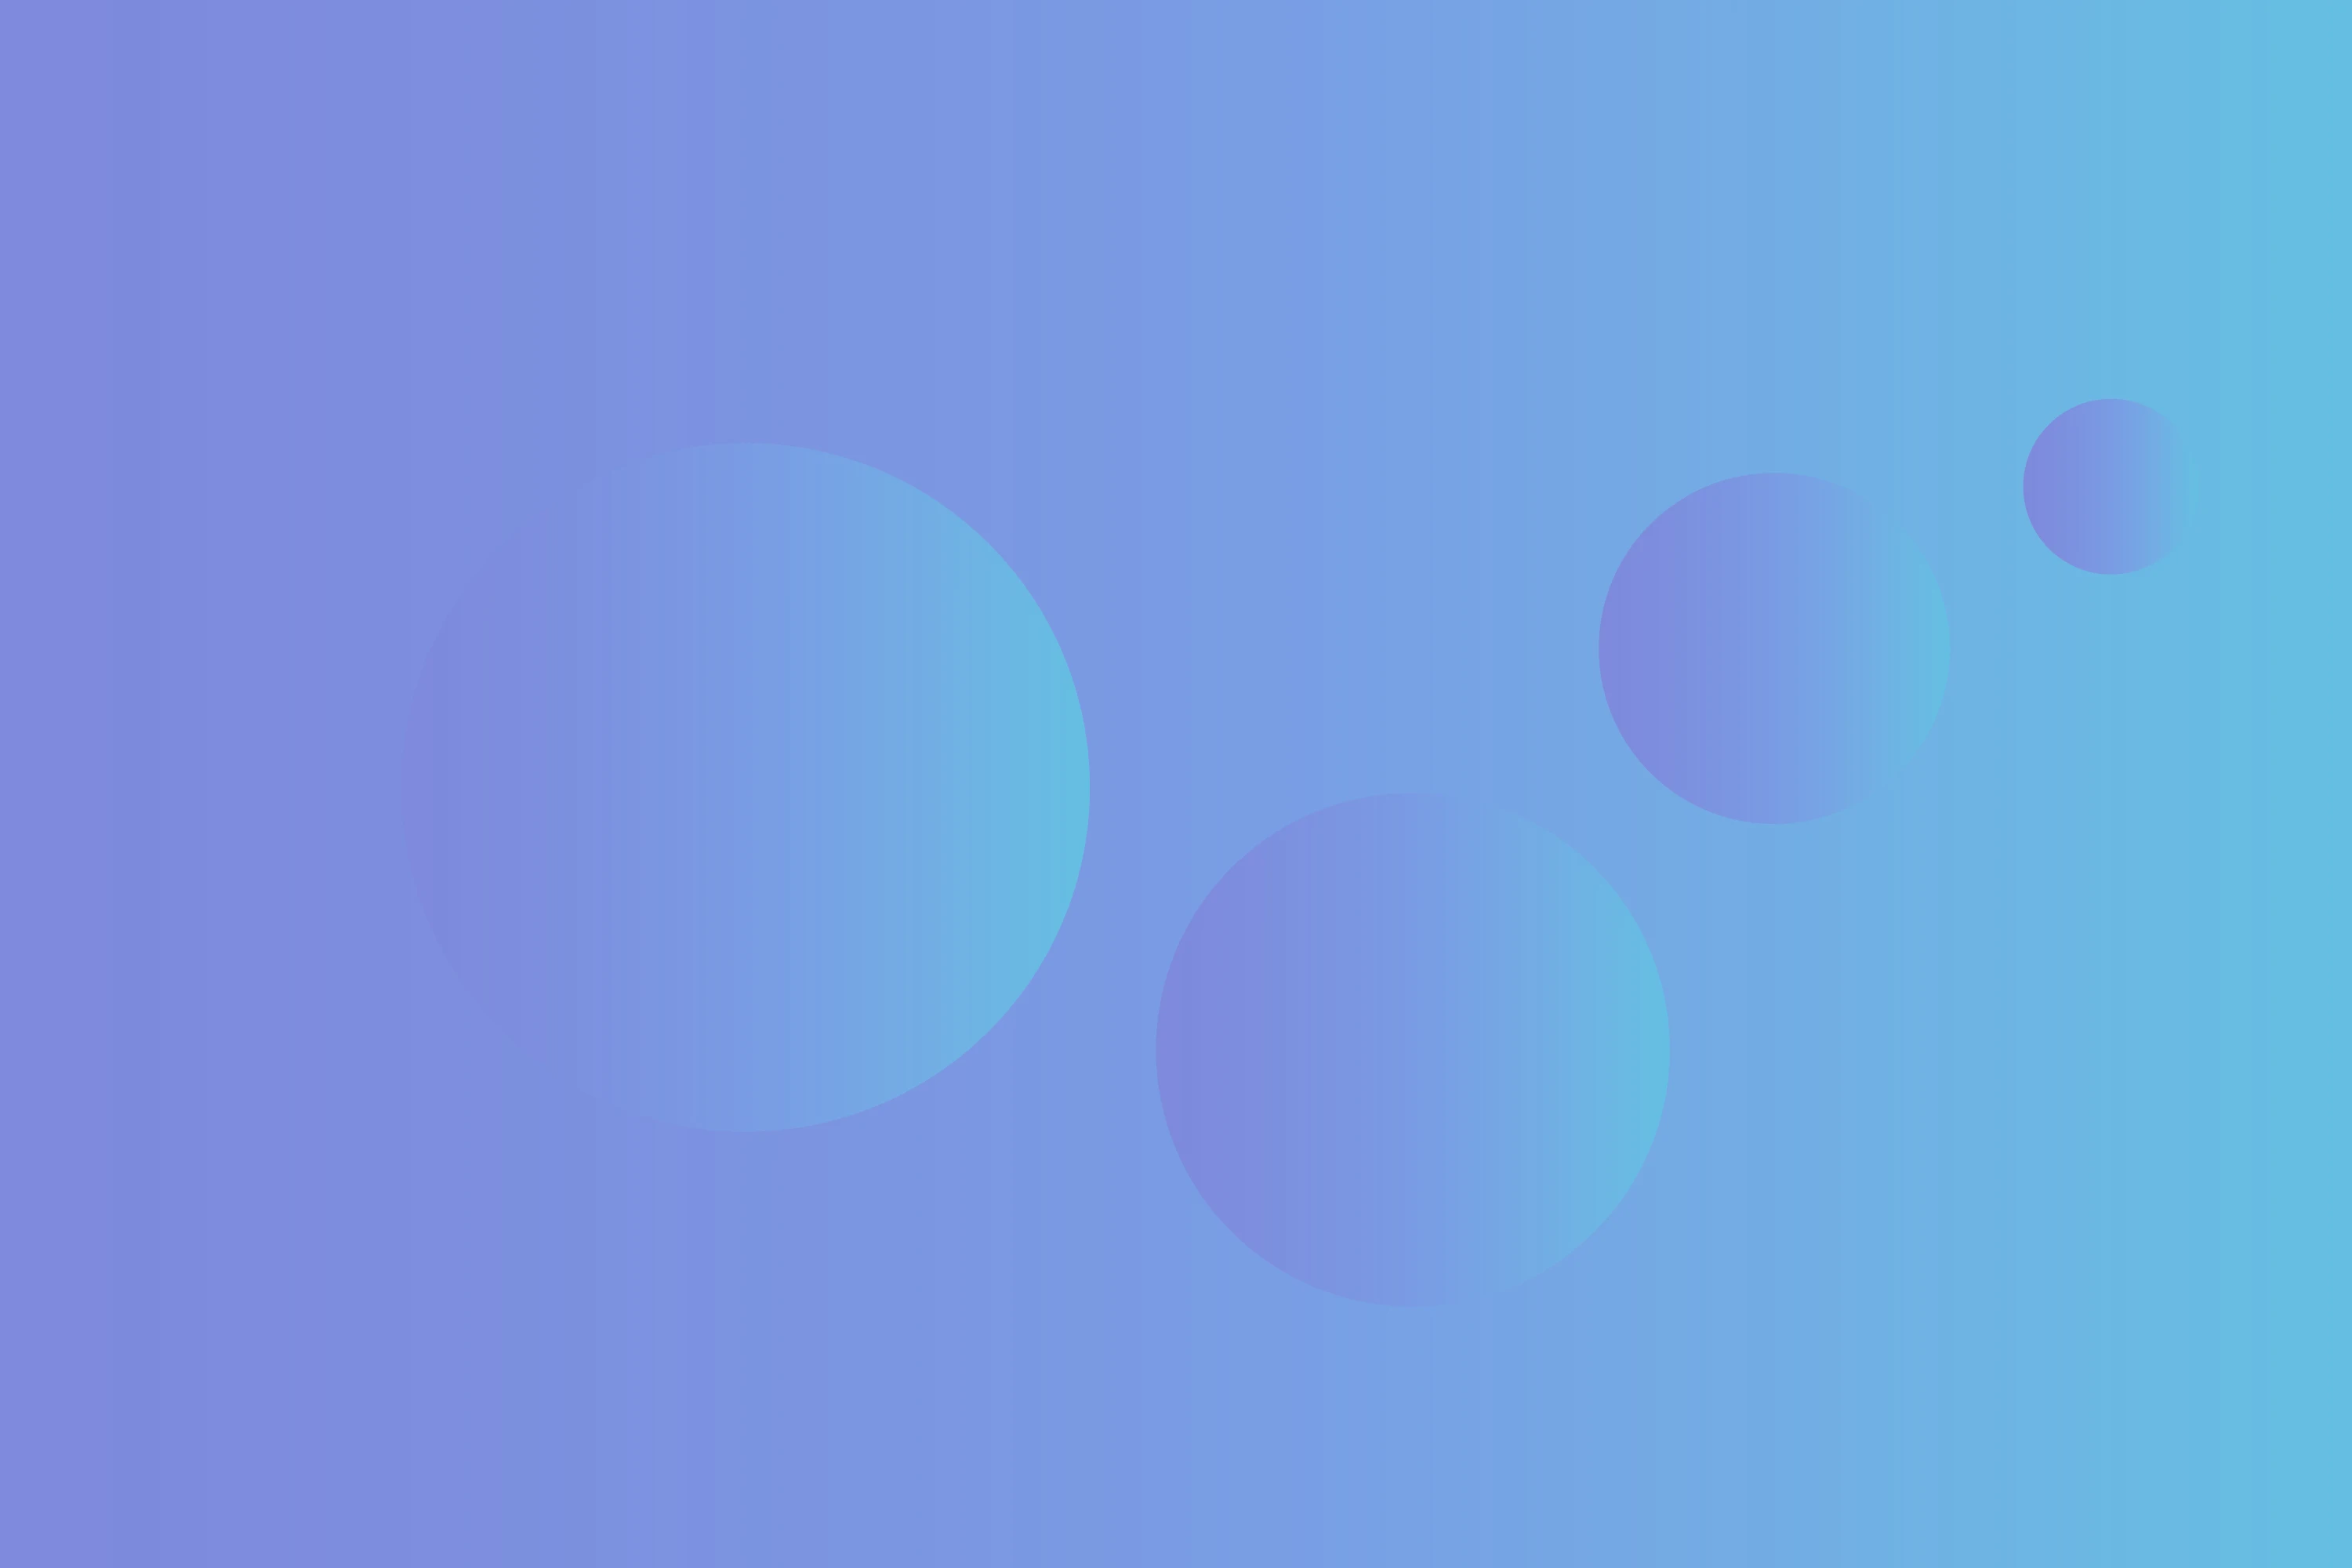 r244-blue-balls-recolored-1698092180862.png